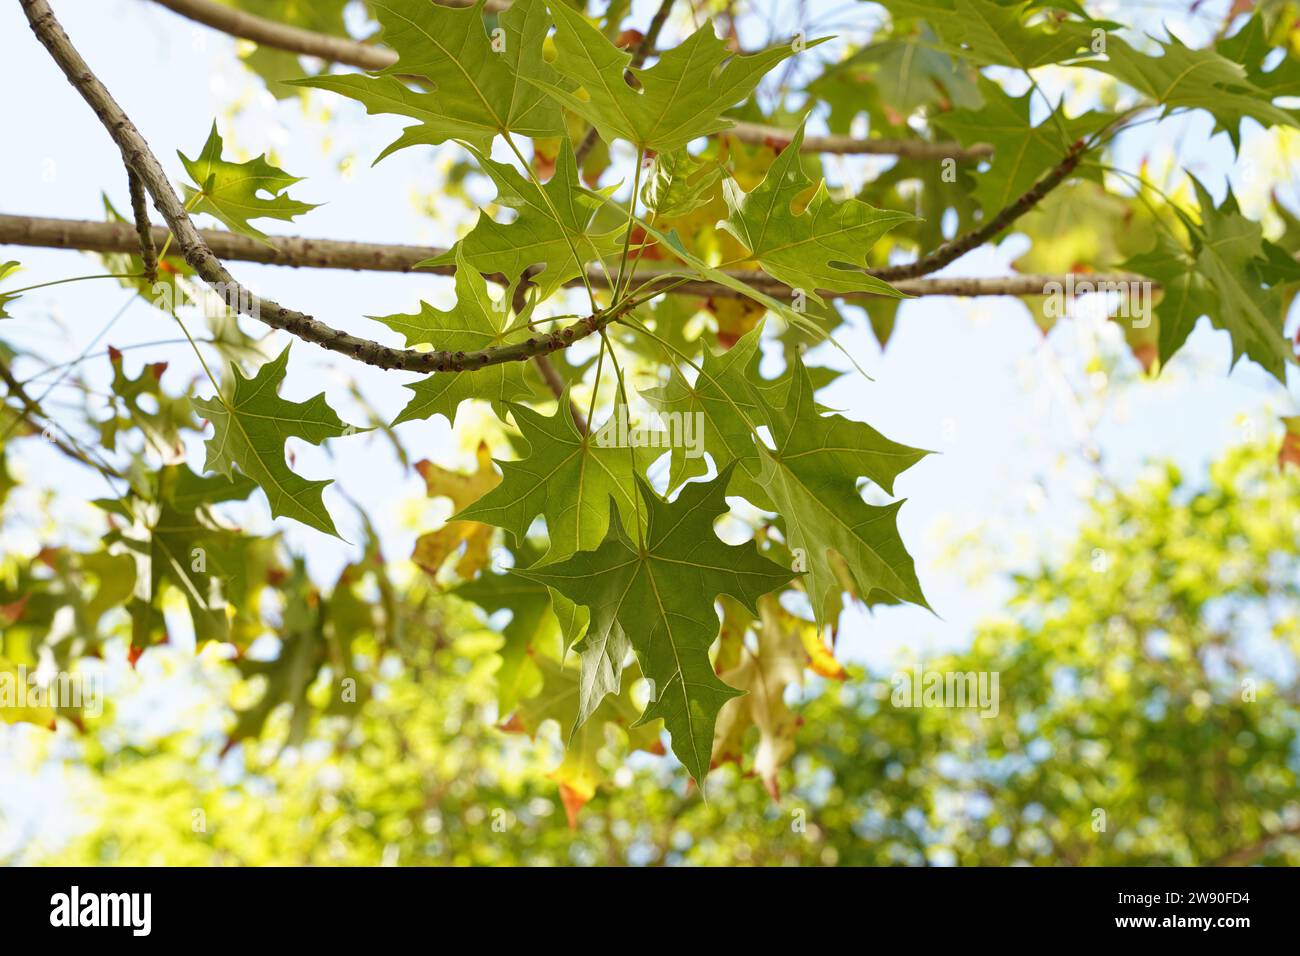 Leaves of Brachychiton australis commonly known as the broad-leaved bottle tree Stock Photo